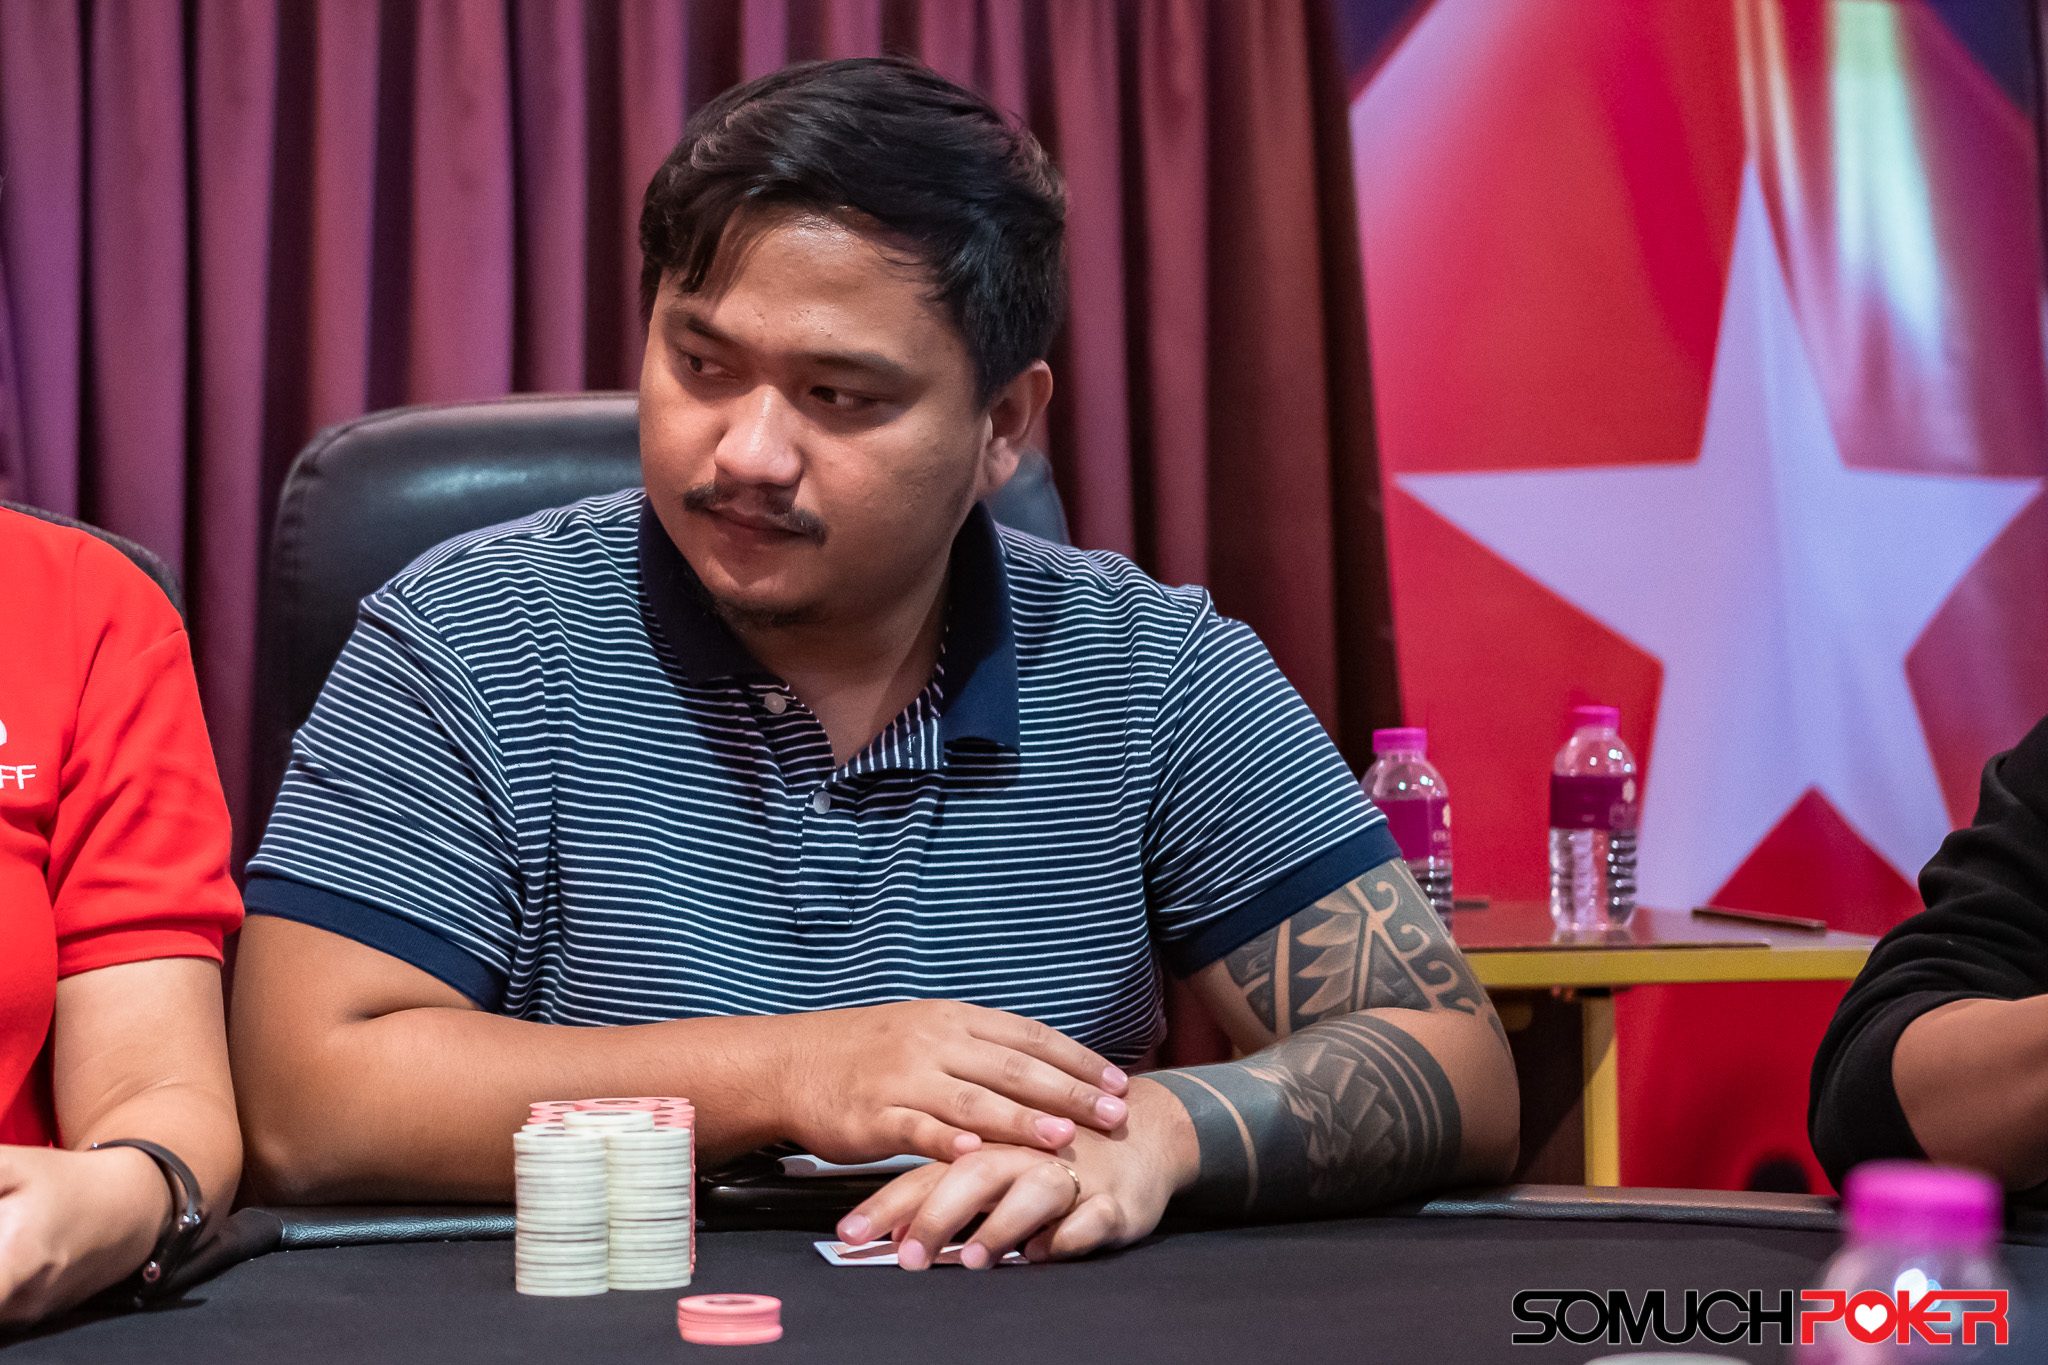 APPT Manila draws 183 to Kick-Off Day 1A, James Moriles tops the counts; Christopher Mateo wins the Hyper Turbo